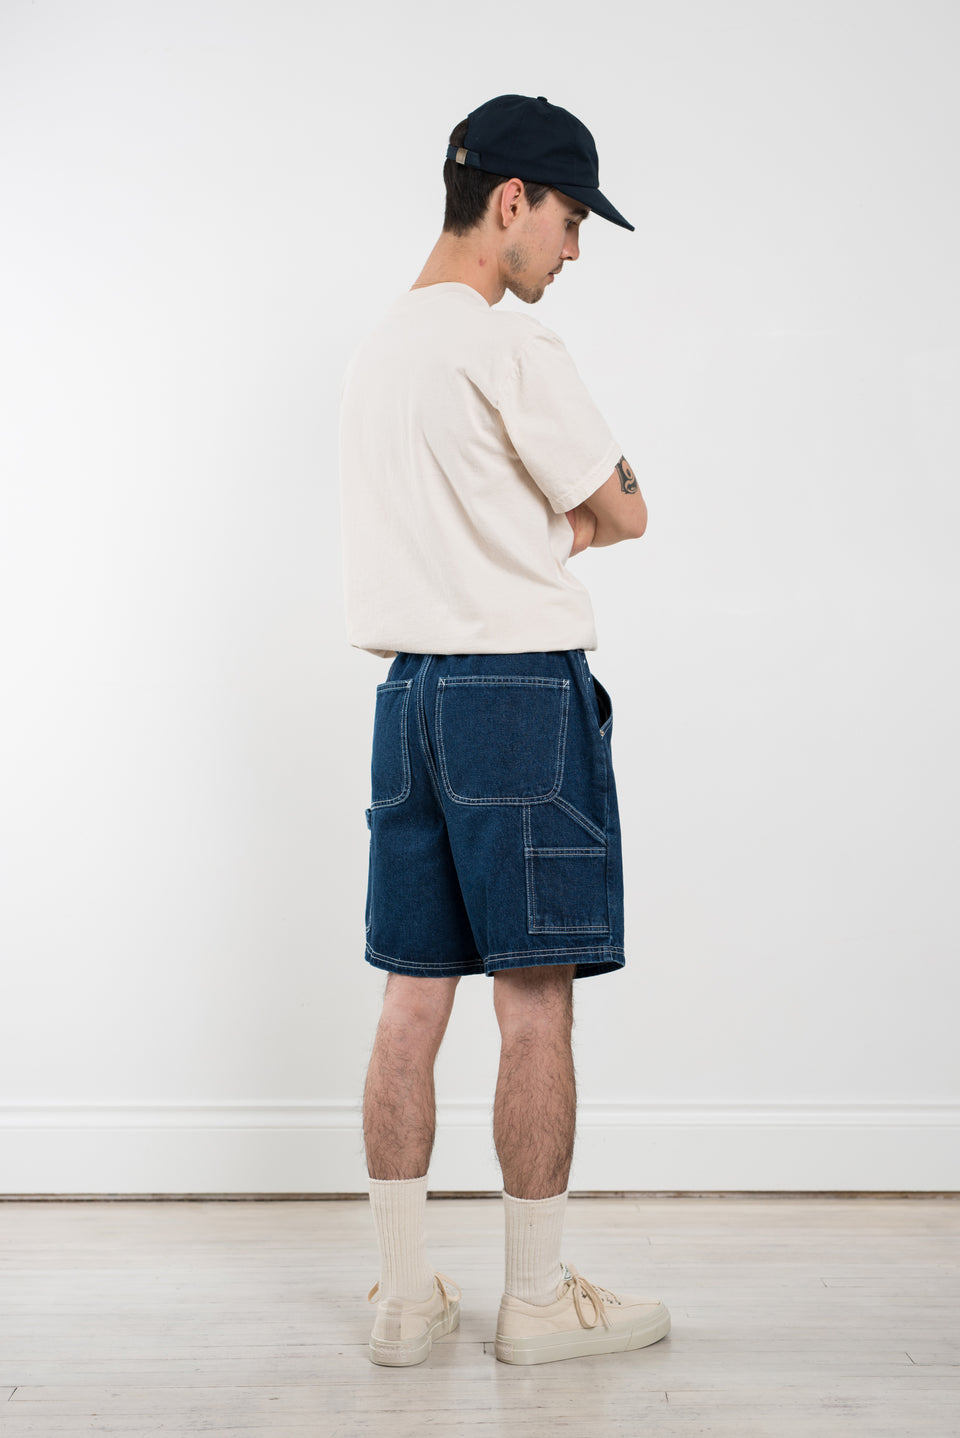 Pop Trading Company SS22 DRS Shorts Rinsed Denim Calculus Victoria BC Canada